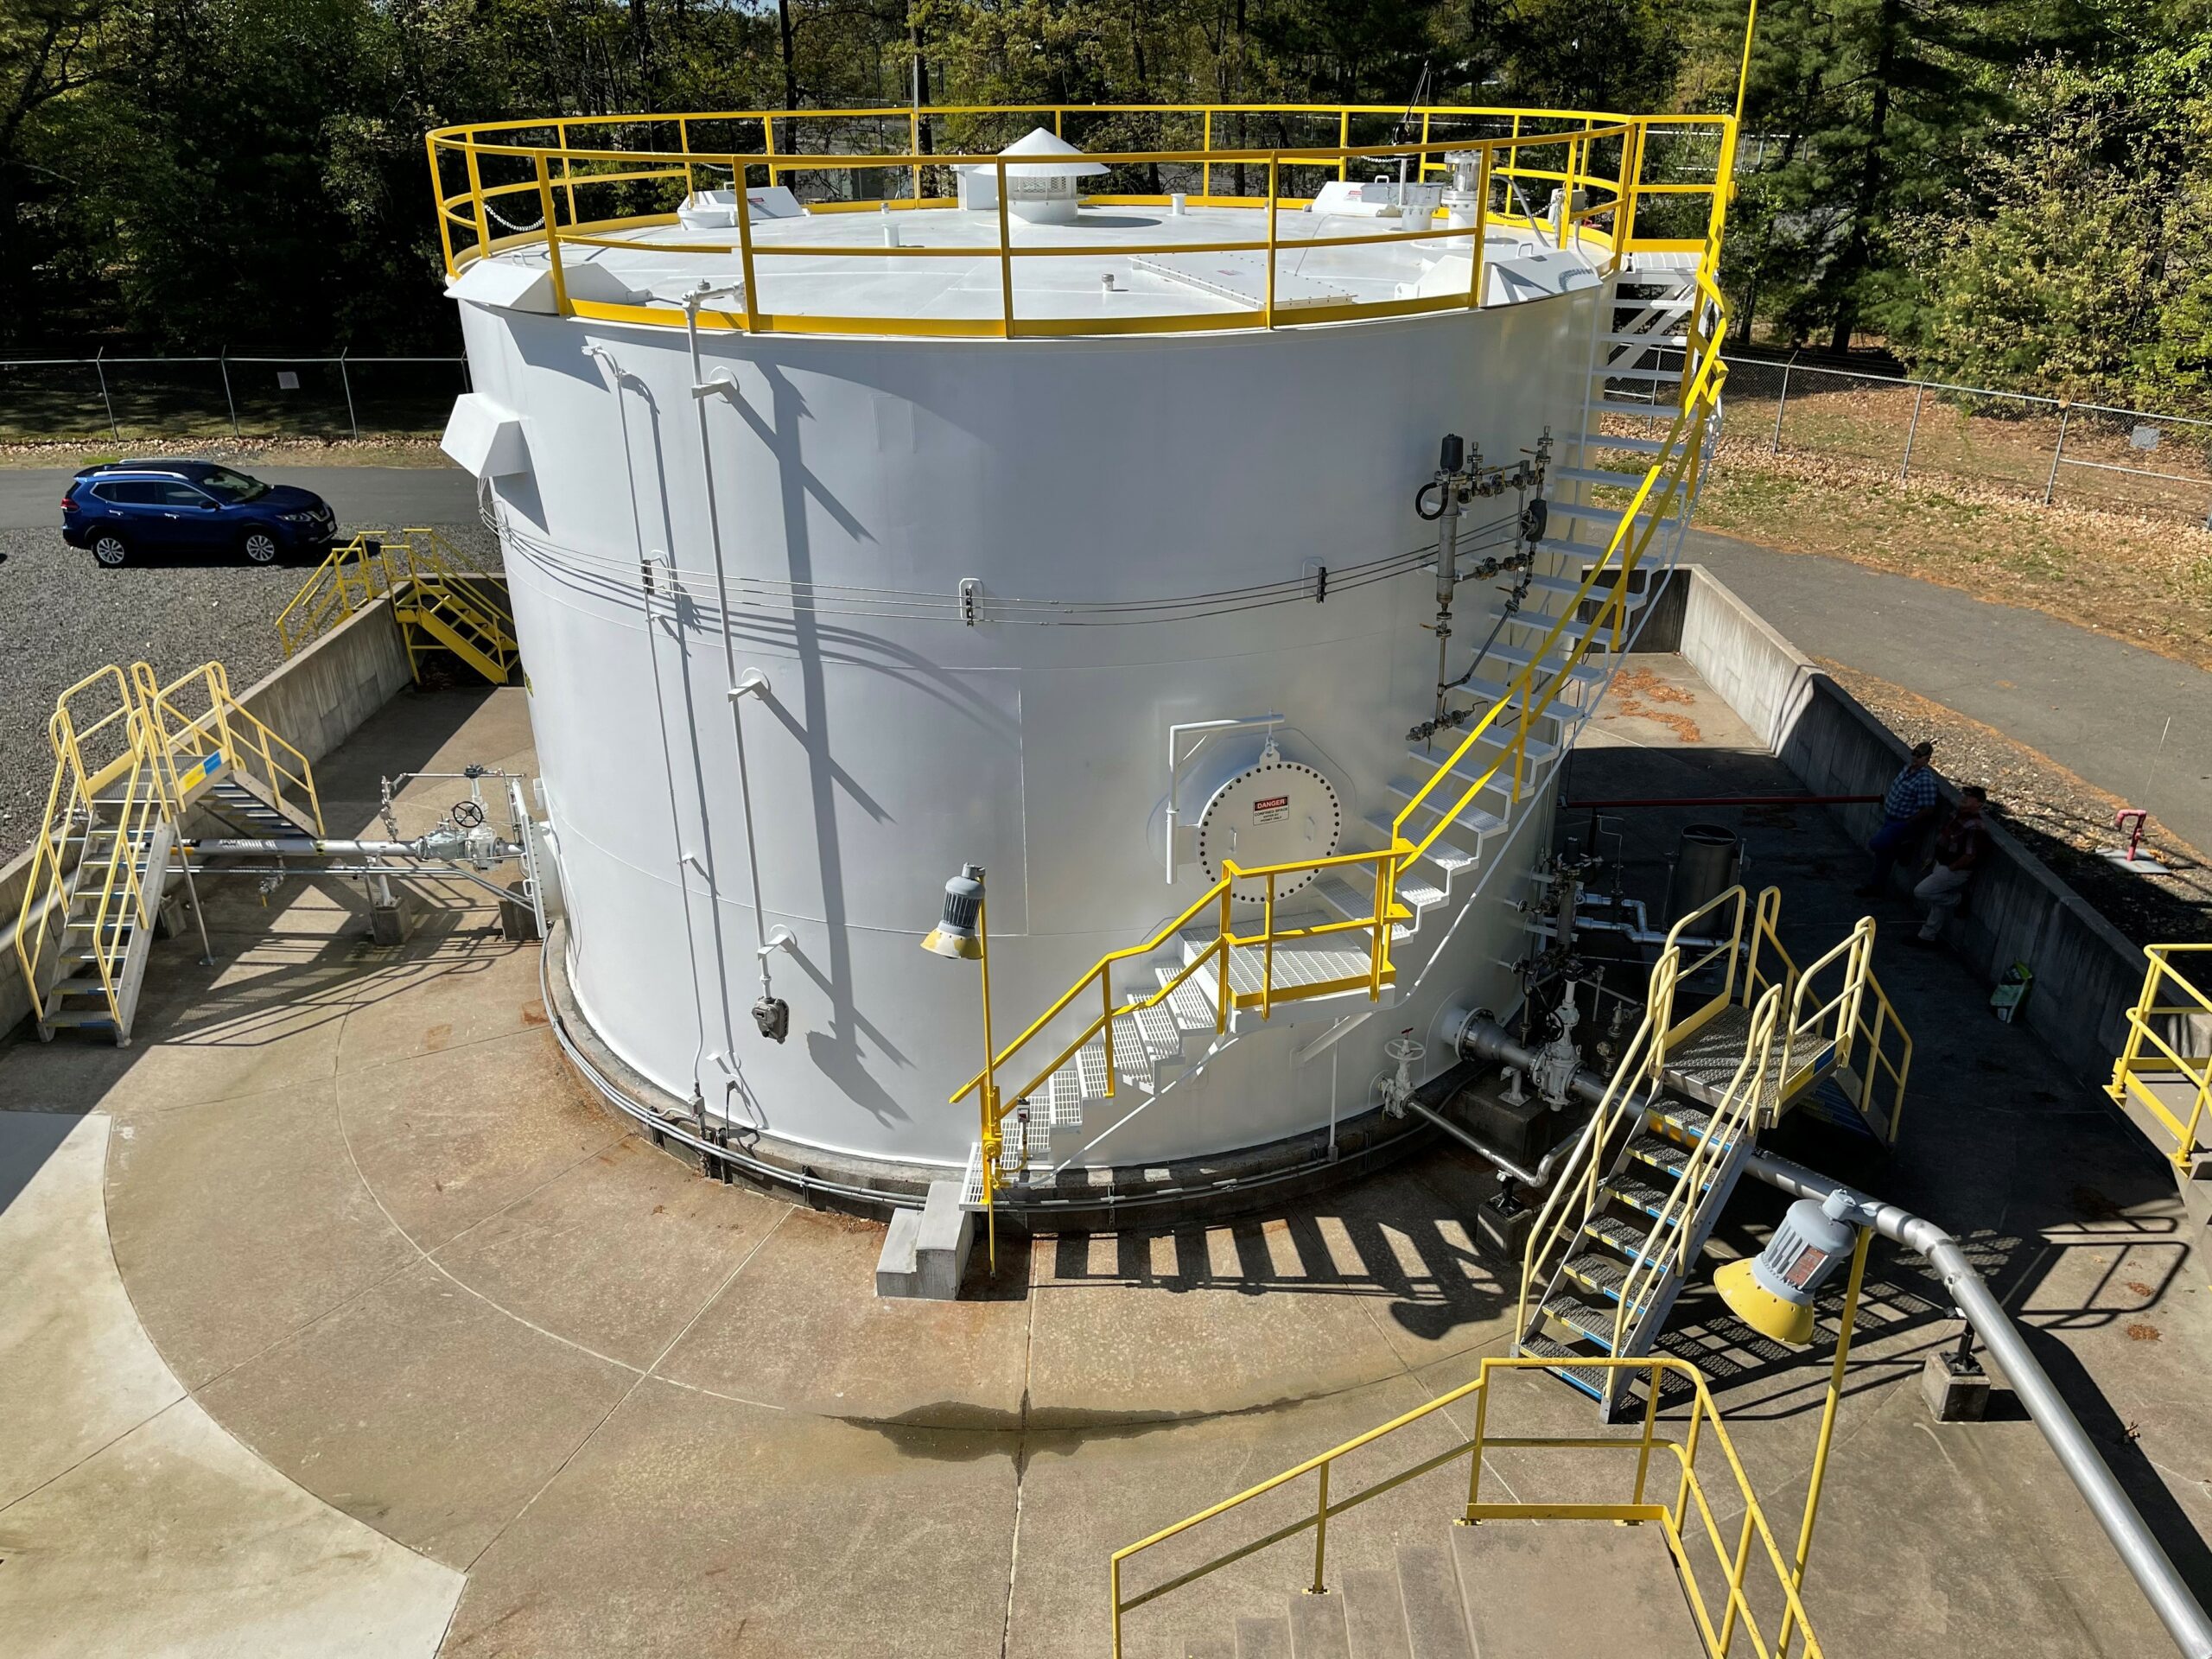 Large industrial storage tank with white exterior and yellow railings, managed by the US Army Corps of Engineers, surrounded by safety stairs and concrete platform, with a car parked nearby.